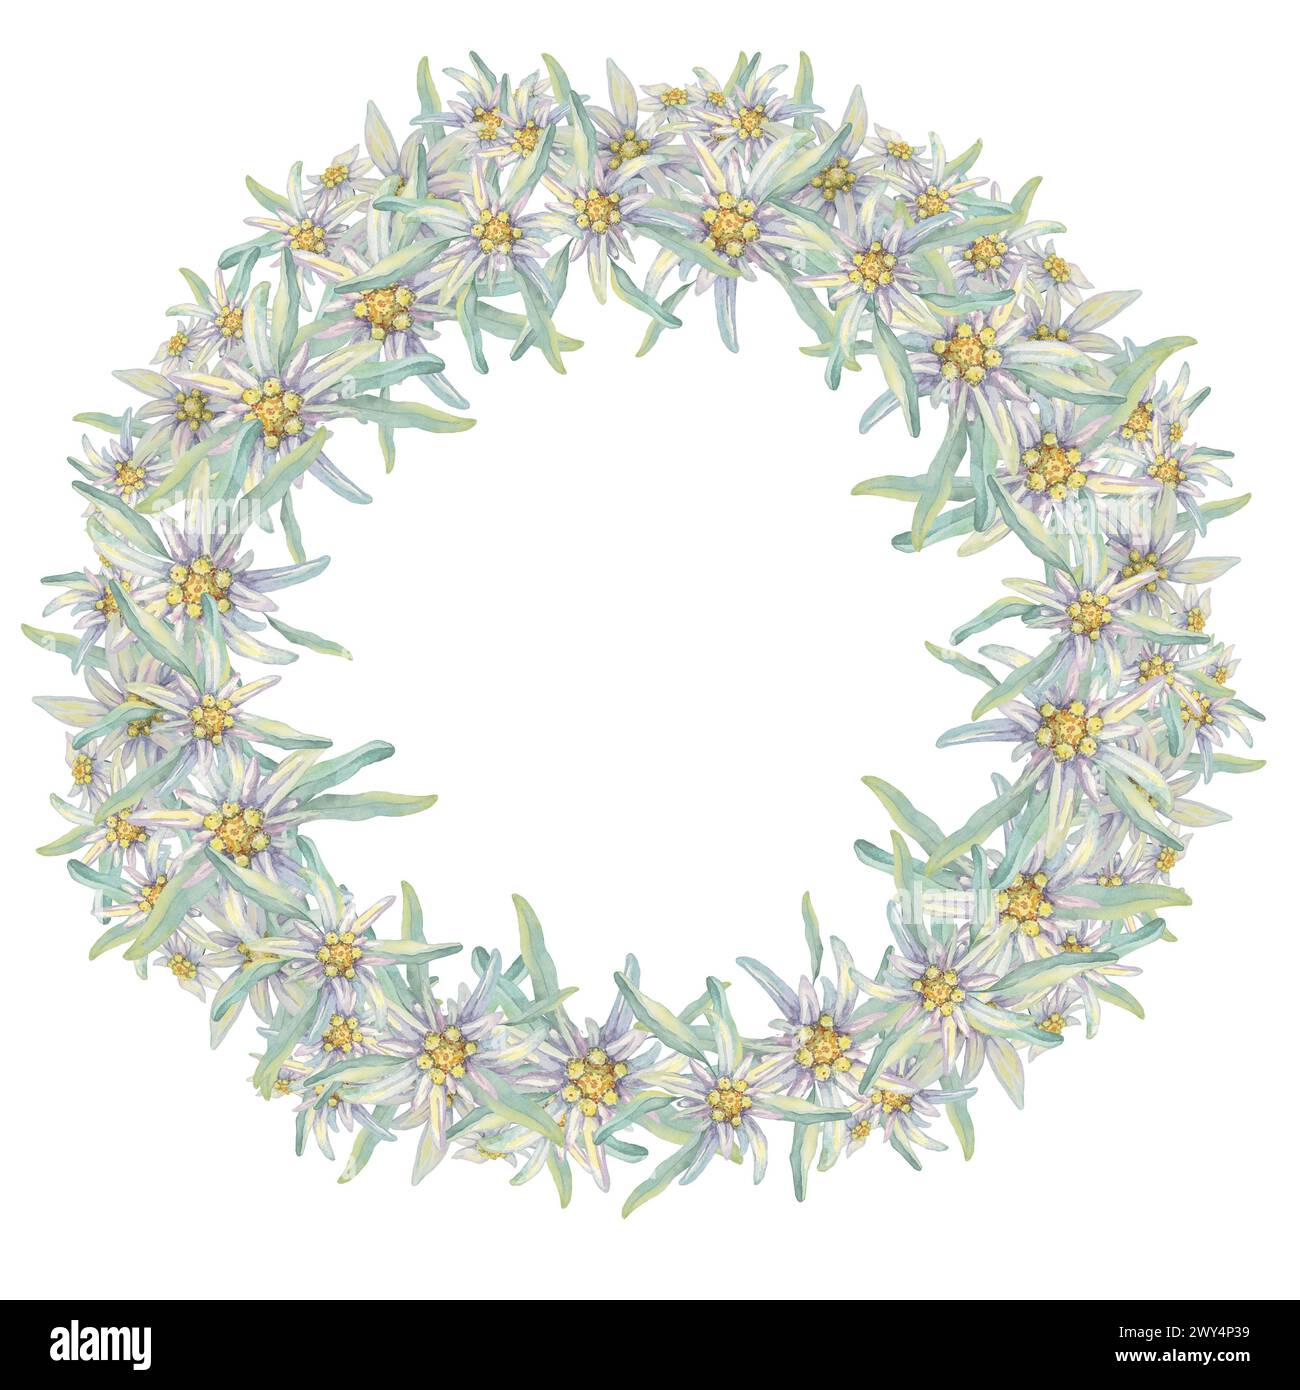 Round wreath of edelweiss flowers. Hand drawn watercolor clipart, minimalistic floral style in pastel colors. Design template for postcard, invitation, printing, weddings, isolated on white background Stock Photo